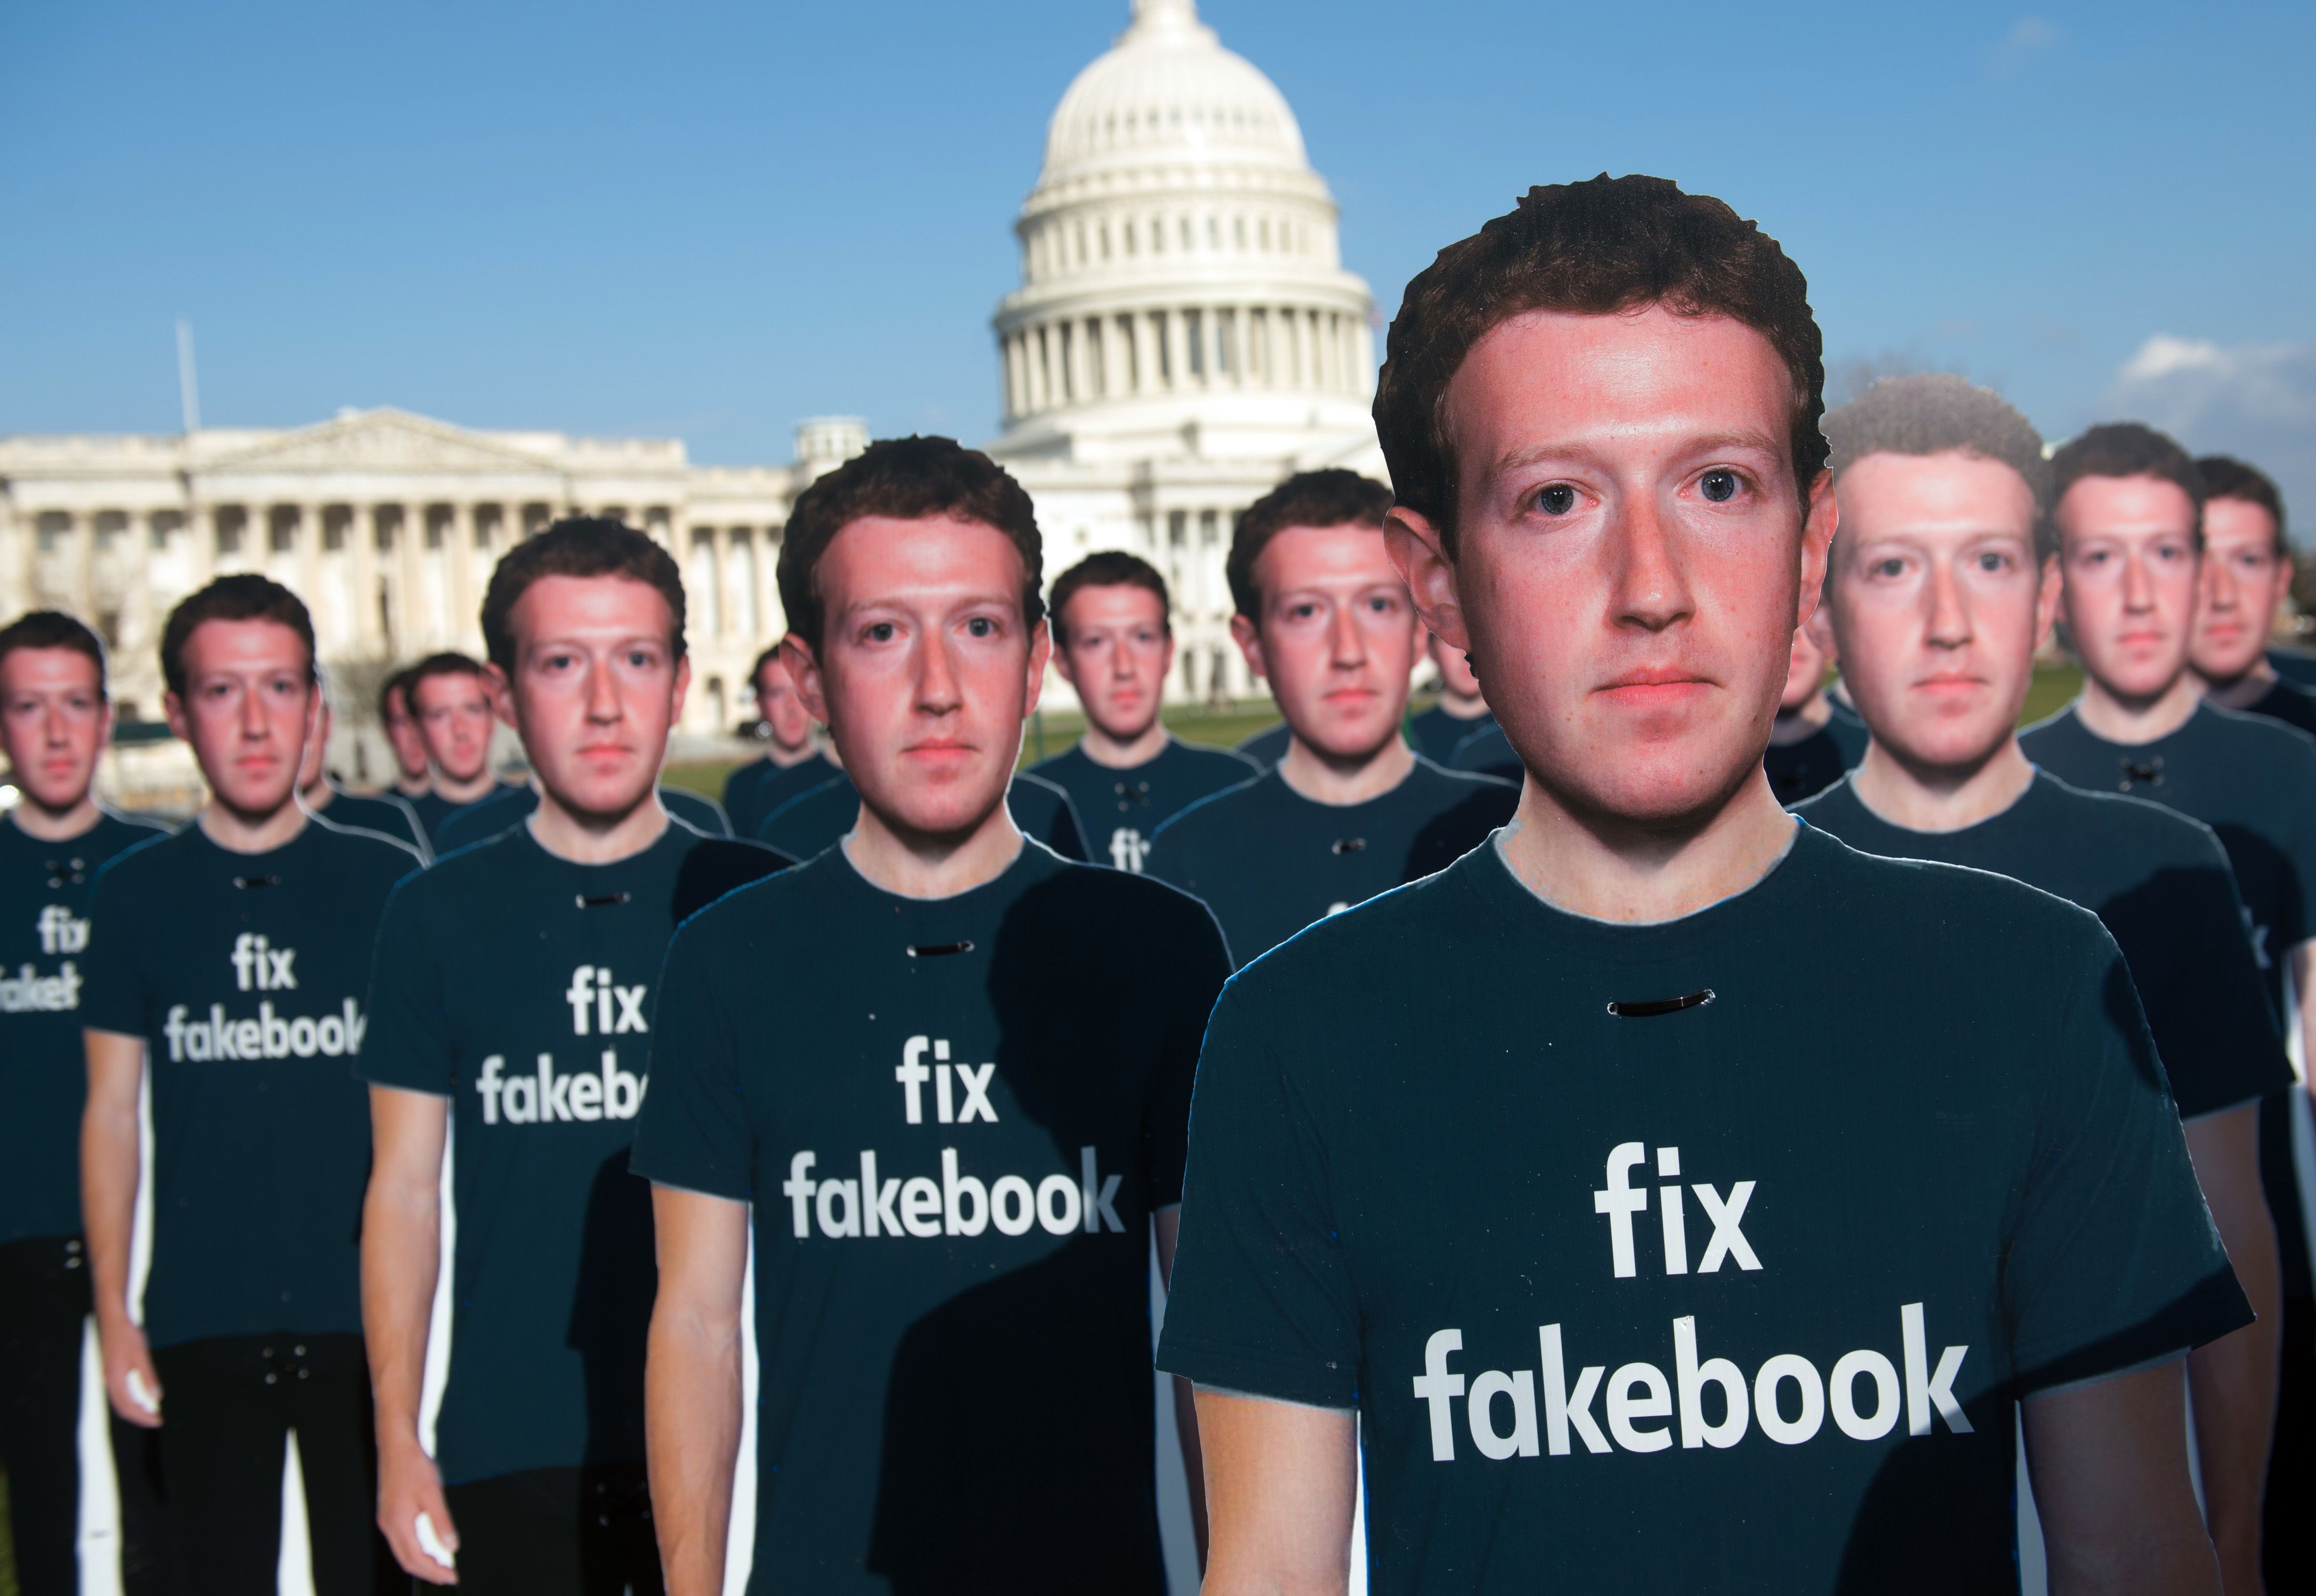 One hundred cardboard cutouts of Facebook founder and CEO Mark Zuckerberg stand outside the U.S. Capitol in Washington, DC, April 10, 2018. Advocacy group Avaaz is calling attention to what the groups says are hundreds of millions of fake accounts still spreading disinformation on Facebook. (Saul Loeb—AFP/Getty Images)